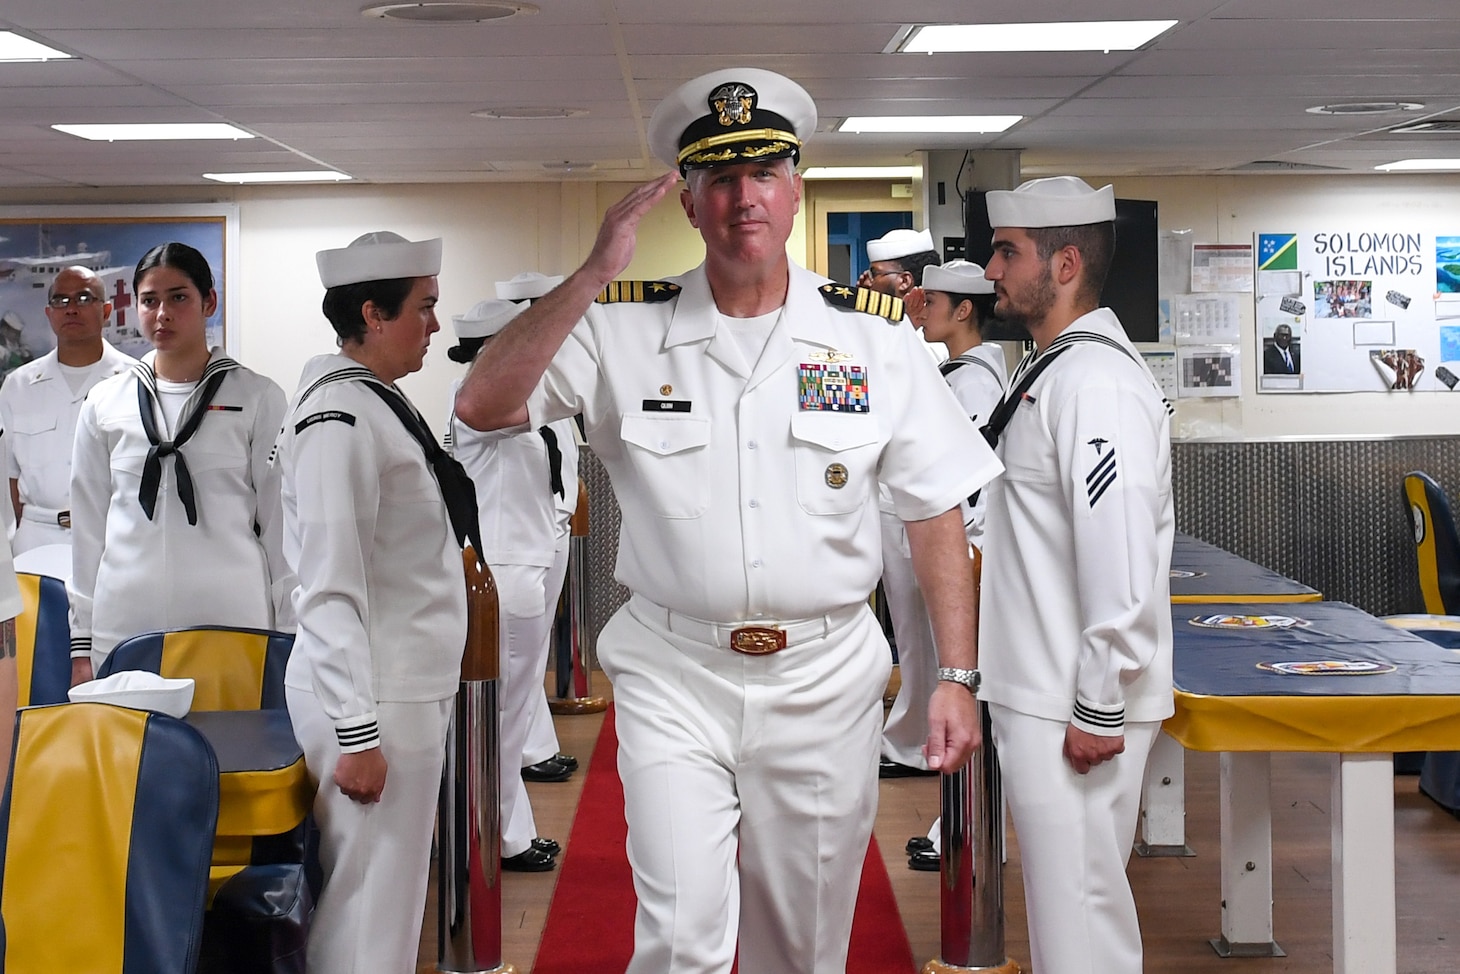 U.S. Navy Capt. Brian Quin, mission commander of Pacific Partnership 2024-1, is piped aboard the hospital ship USNS Mercy (T-AH 19) during the Pacific Partnership 2024-1 closing ceremony for the Republic of the Marshall Islands mission stop Nov. 10, 2023. Pacific Partnership, now in its 19th iteration, is the largest multinational humanitarian assistance and disaster relief preparedness mission conducted in the Indo-Pacific and works to enhance regional interoperability and disaster response capabilities, increase security stability in the region, and foster new and enduring friendships. (U.S. Navy photo by Mass Communication Specialist Seaman Justin Ontiveros)